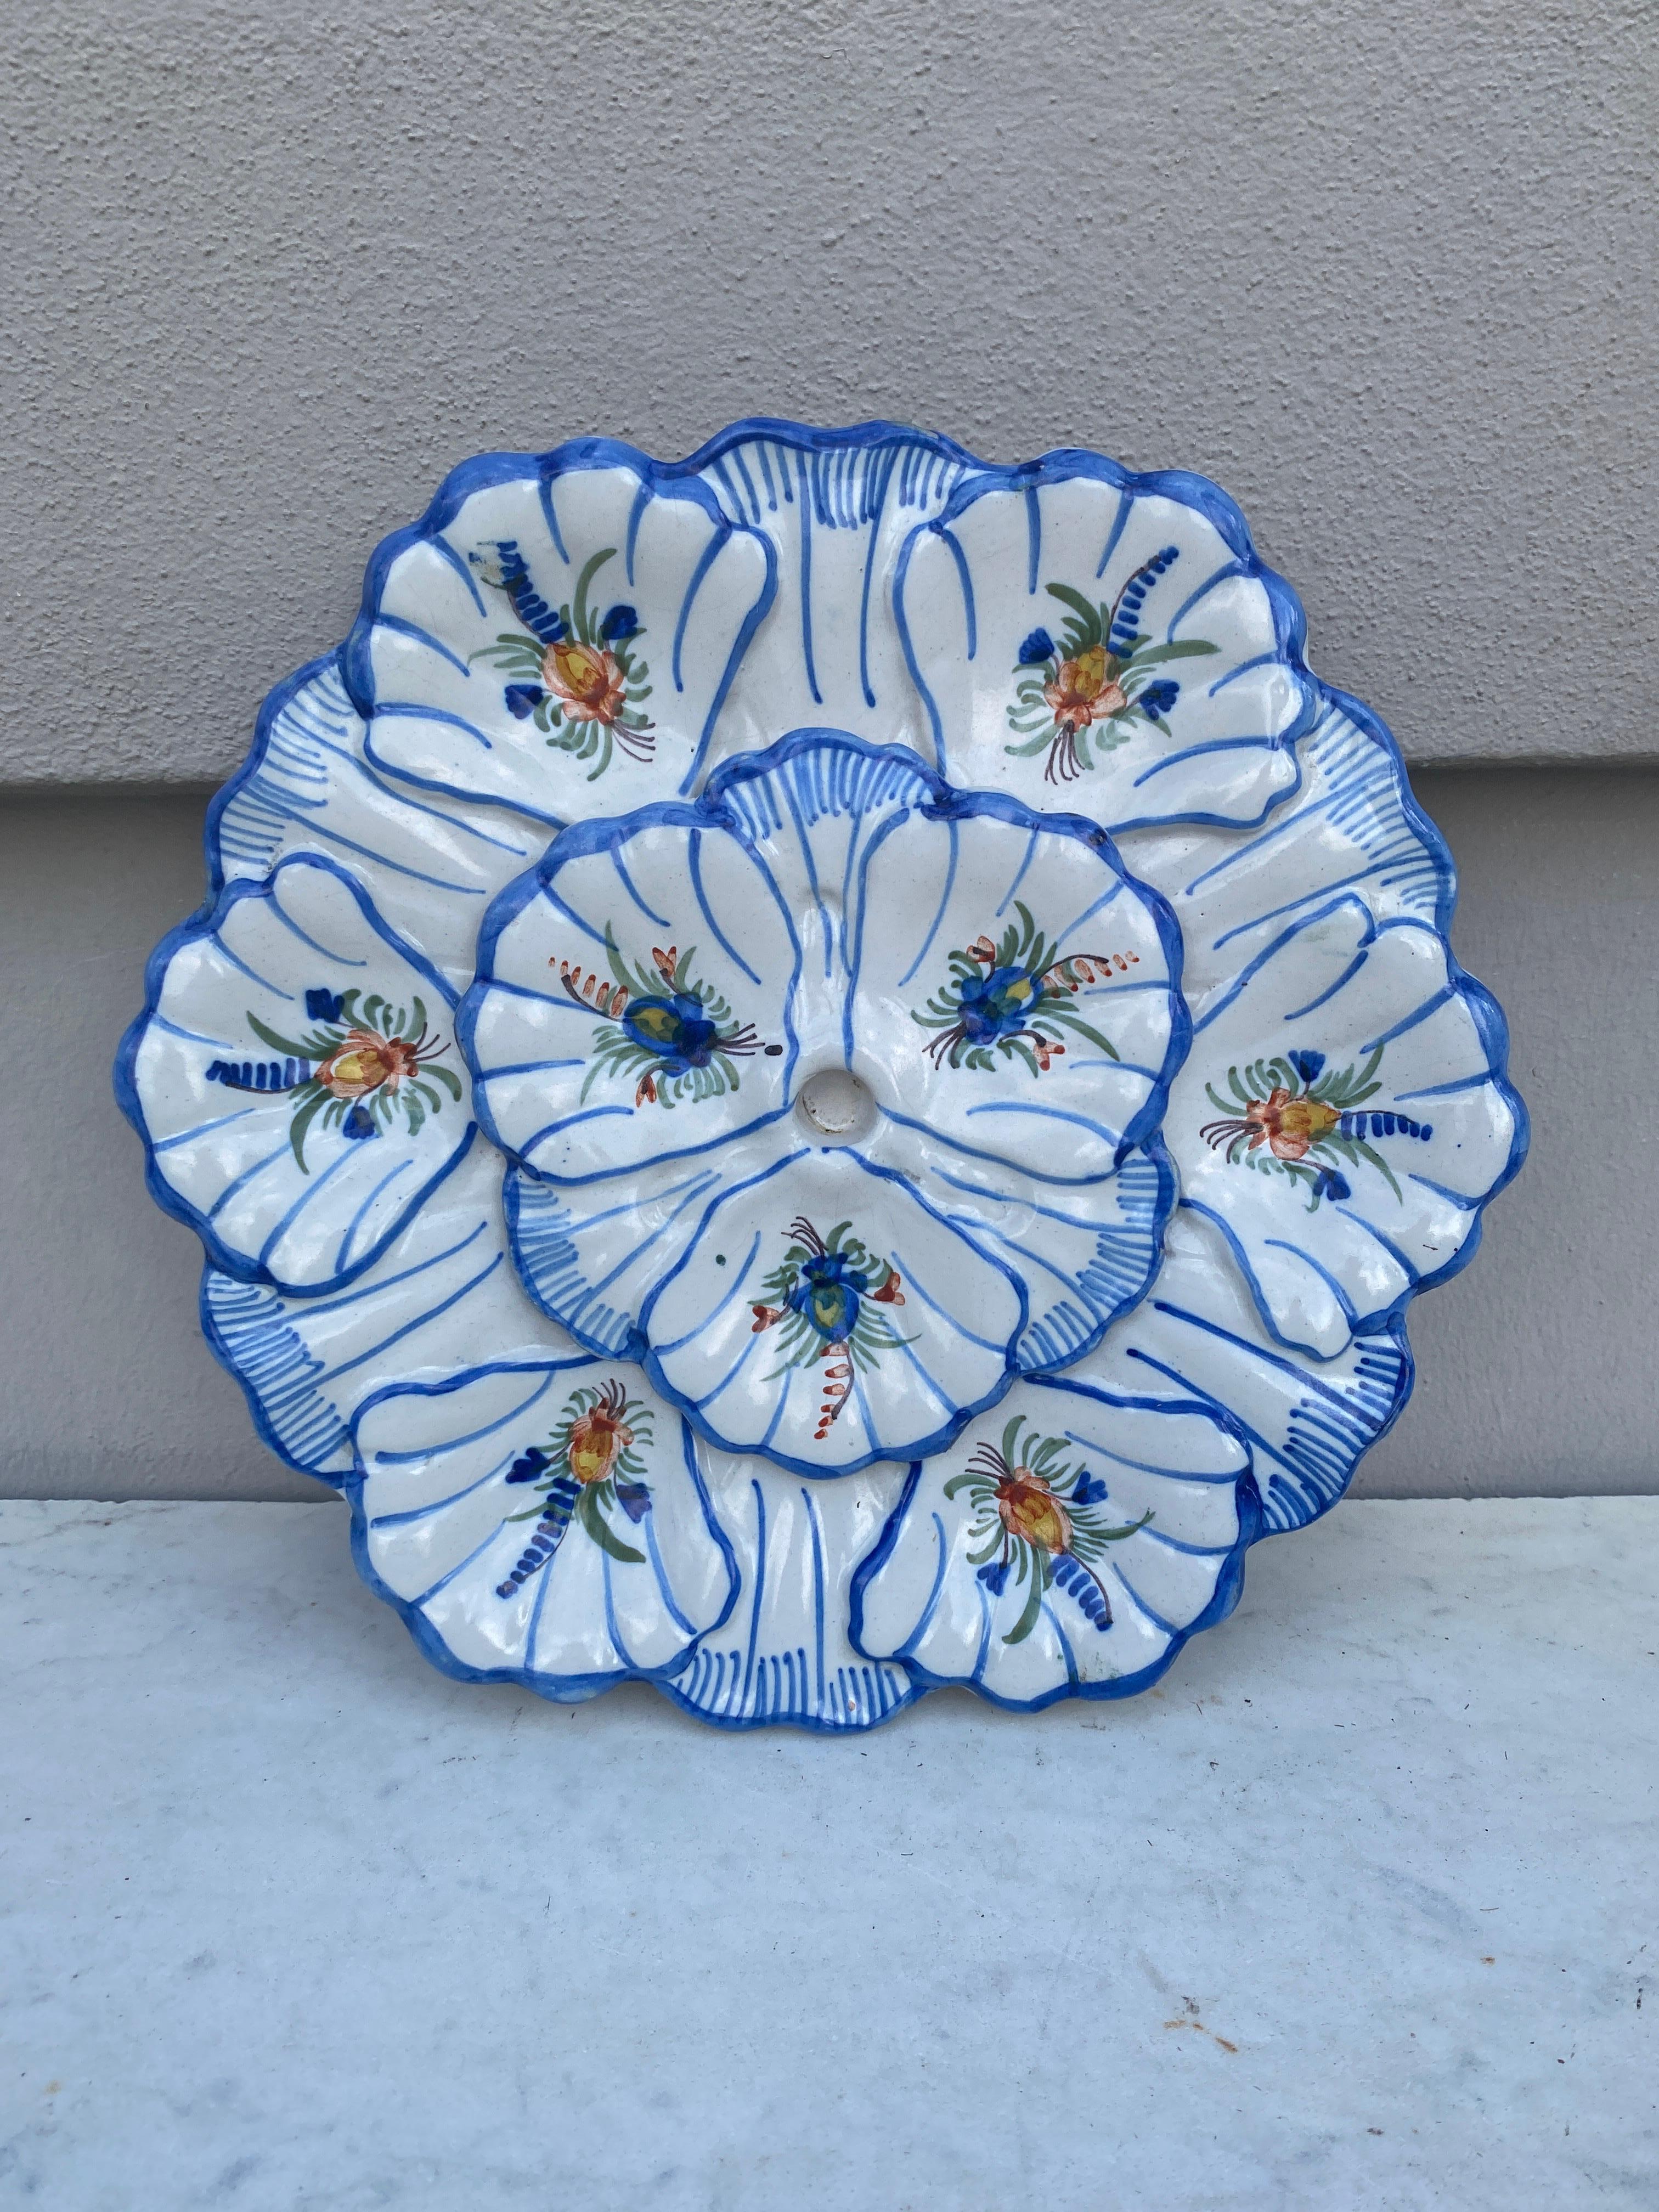 French blue & white Faience oyster platter Moustiers style, circa 1940.
12 inches diameter.